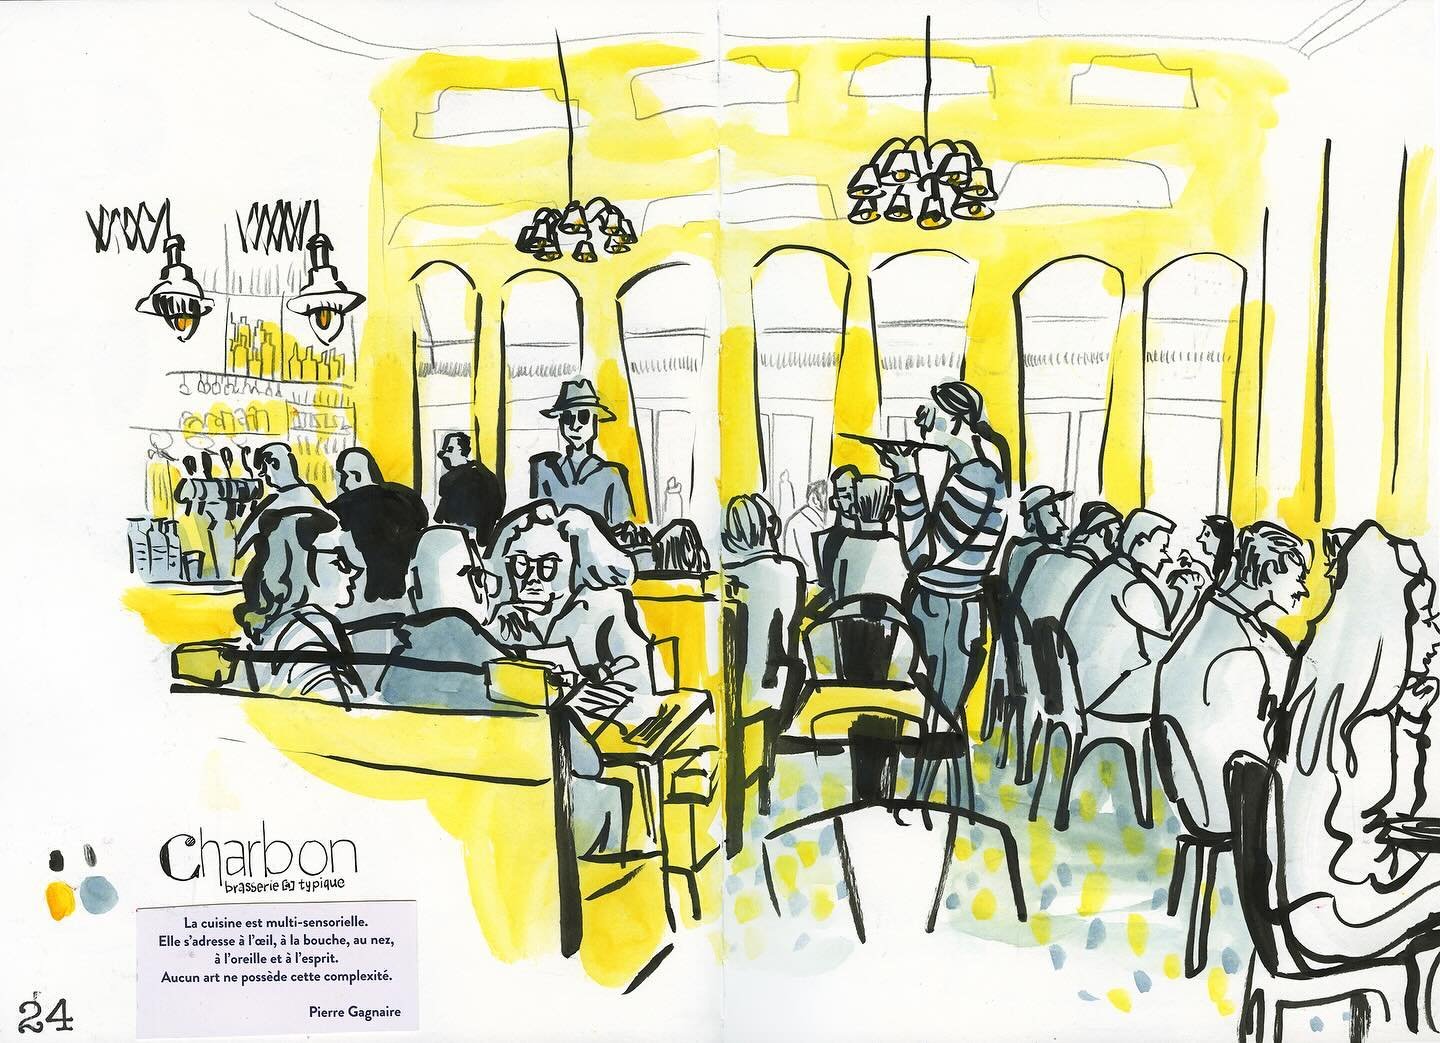 Sitting on a terrace in sunny Paris to people-watch and draw&hellip; doesn&rsquo;t that sound like a dream!

Make this dream come true and join @sabinewisman and me in Paris in June!

Sabine and I have lead the workshop City Drawing Trip Paris a coup